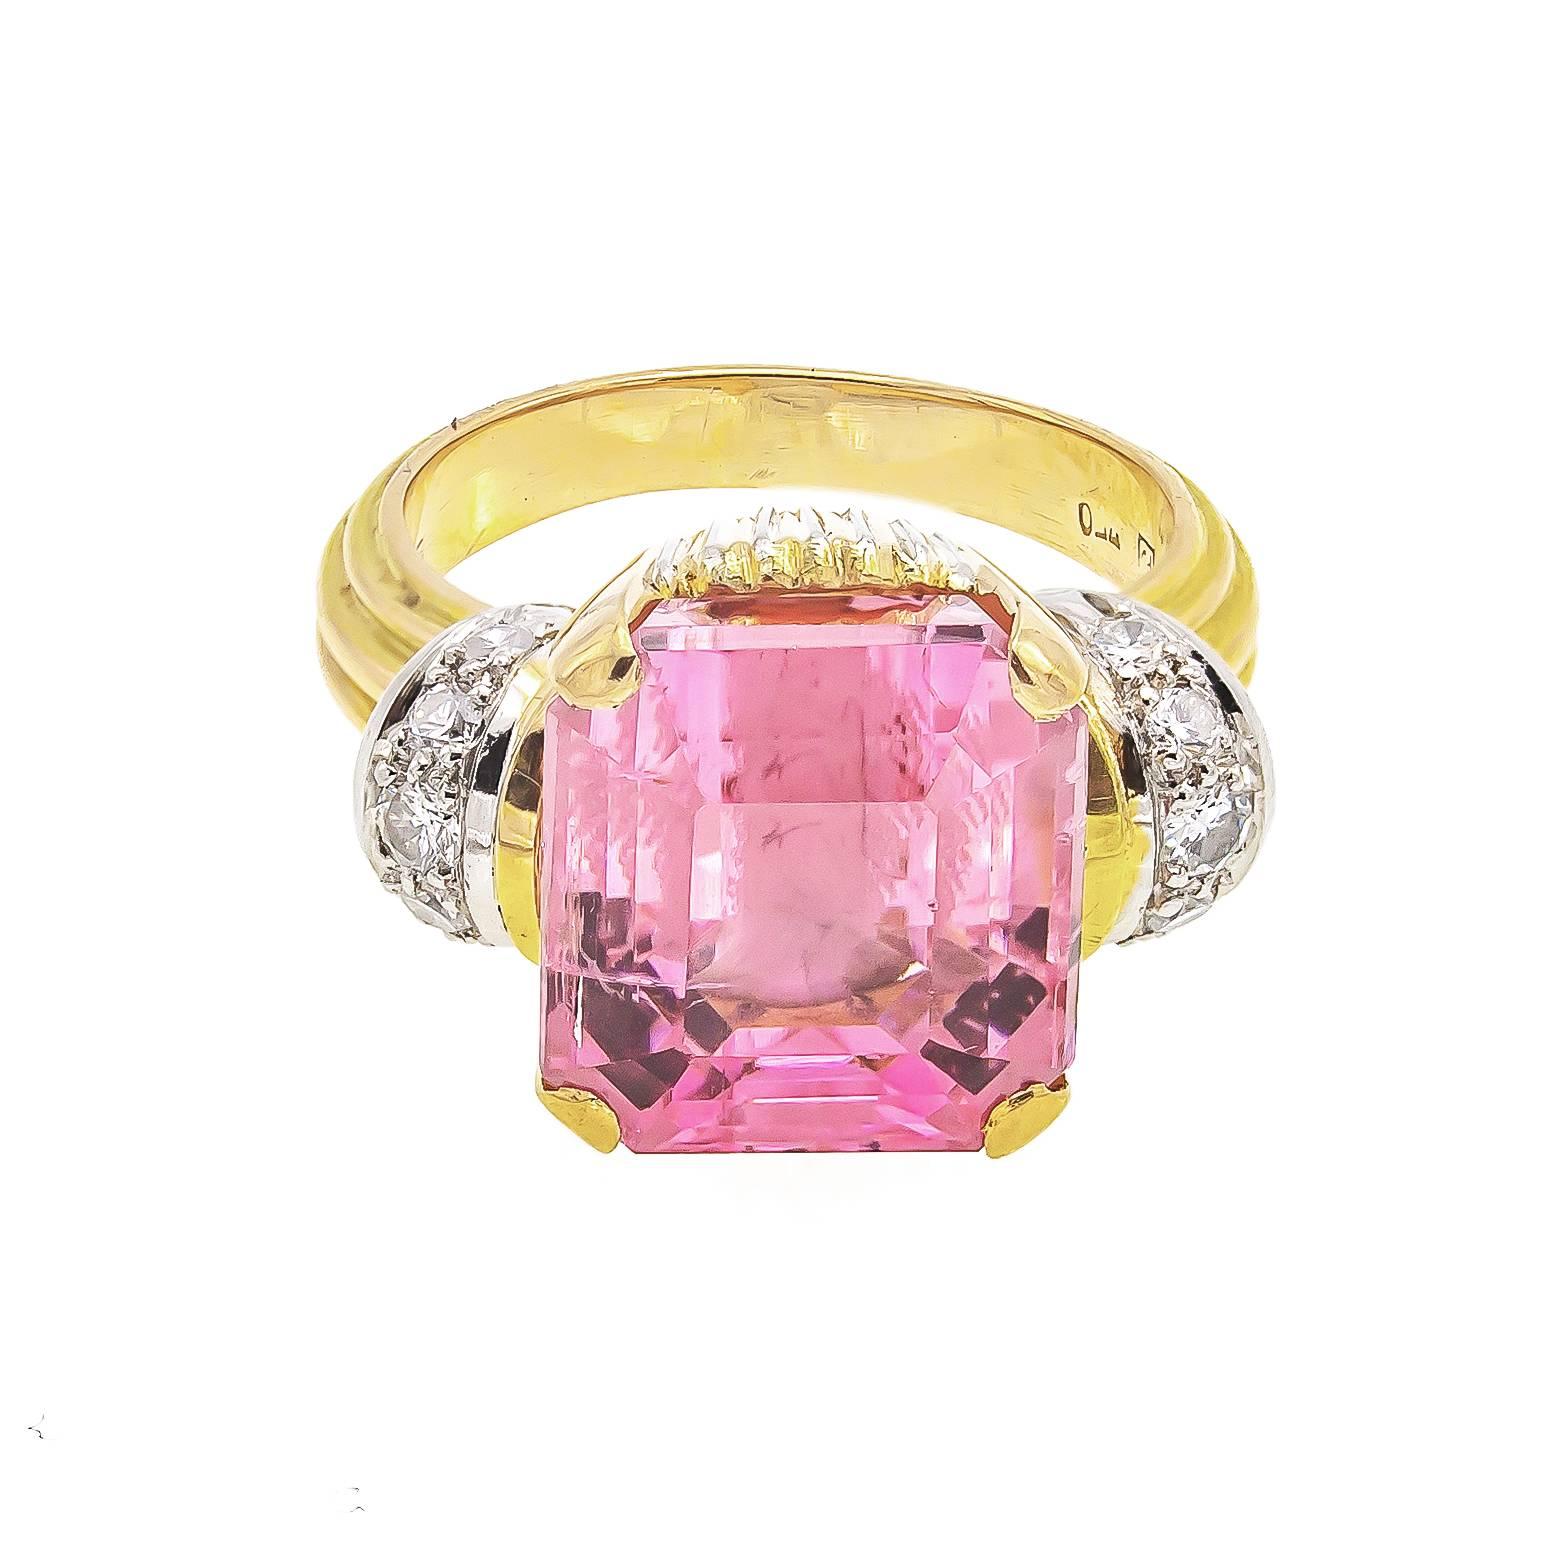 Eleven carats of glamorous pink tourmaline! Iconic of the 1950's with big bright femininity, this era was not afraid to spend and show their fashion. A stunning candy-like pink tourmaline cushion ring, faceted, detailed and gorgeous! The accent